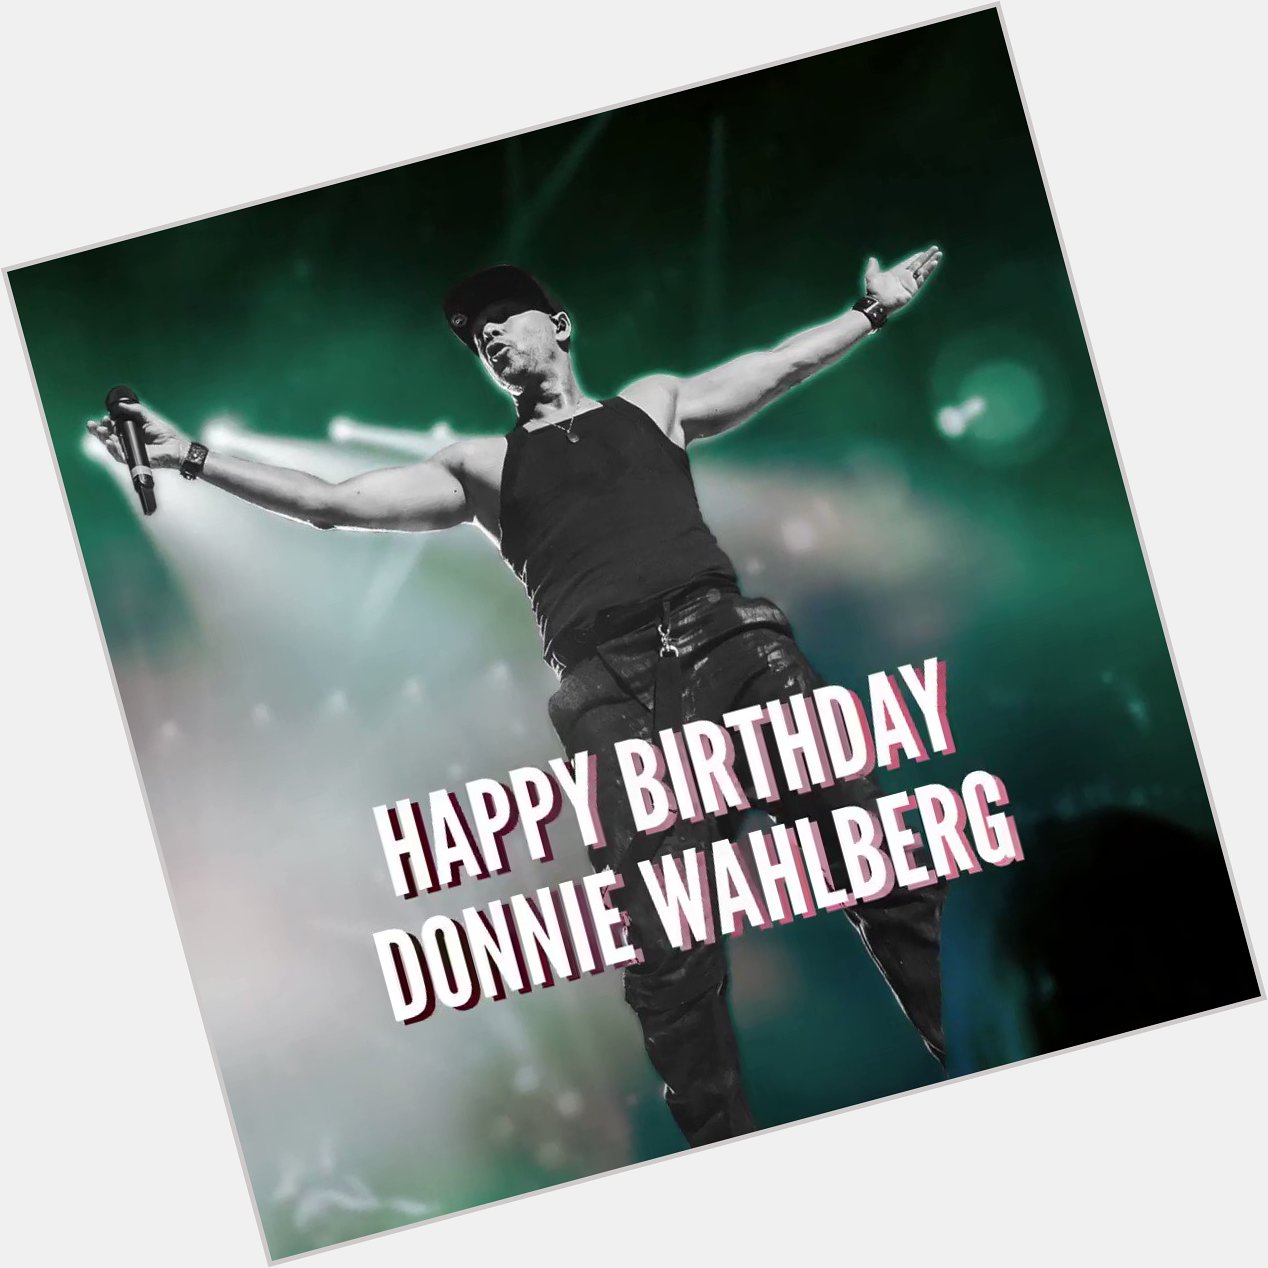 Throw your hands in the air and comment below to wish Donnie Wahlberg of a happy birthday! 